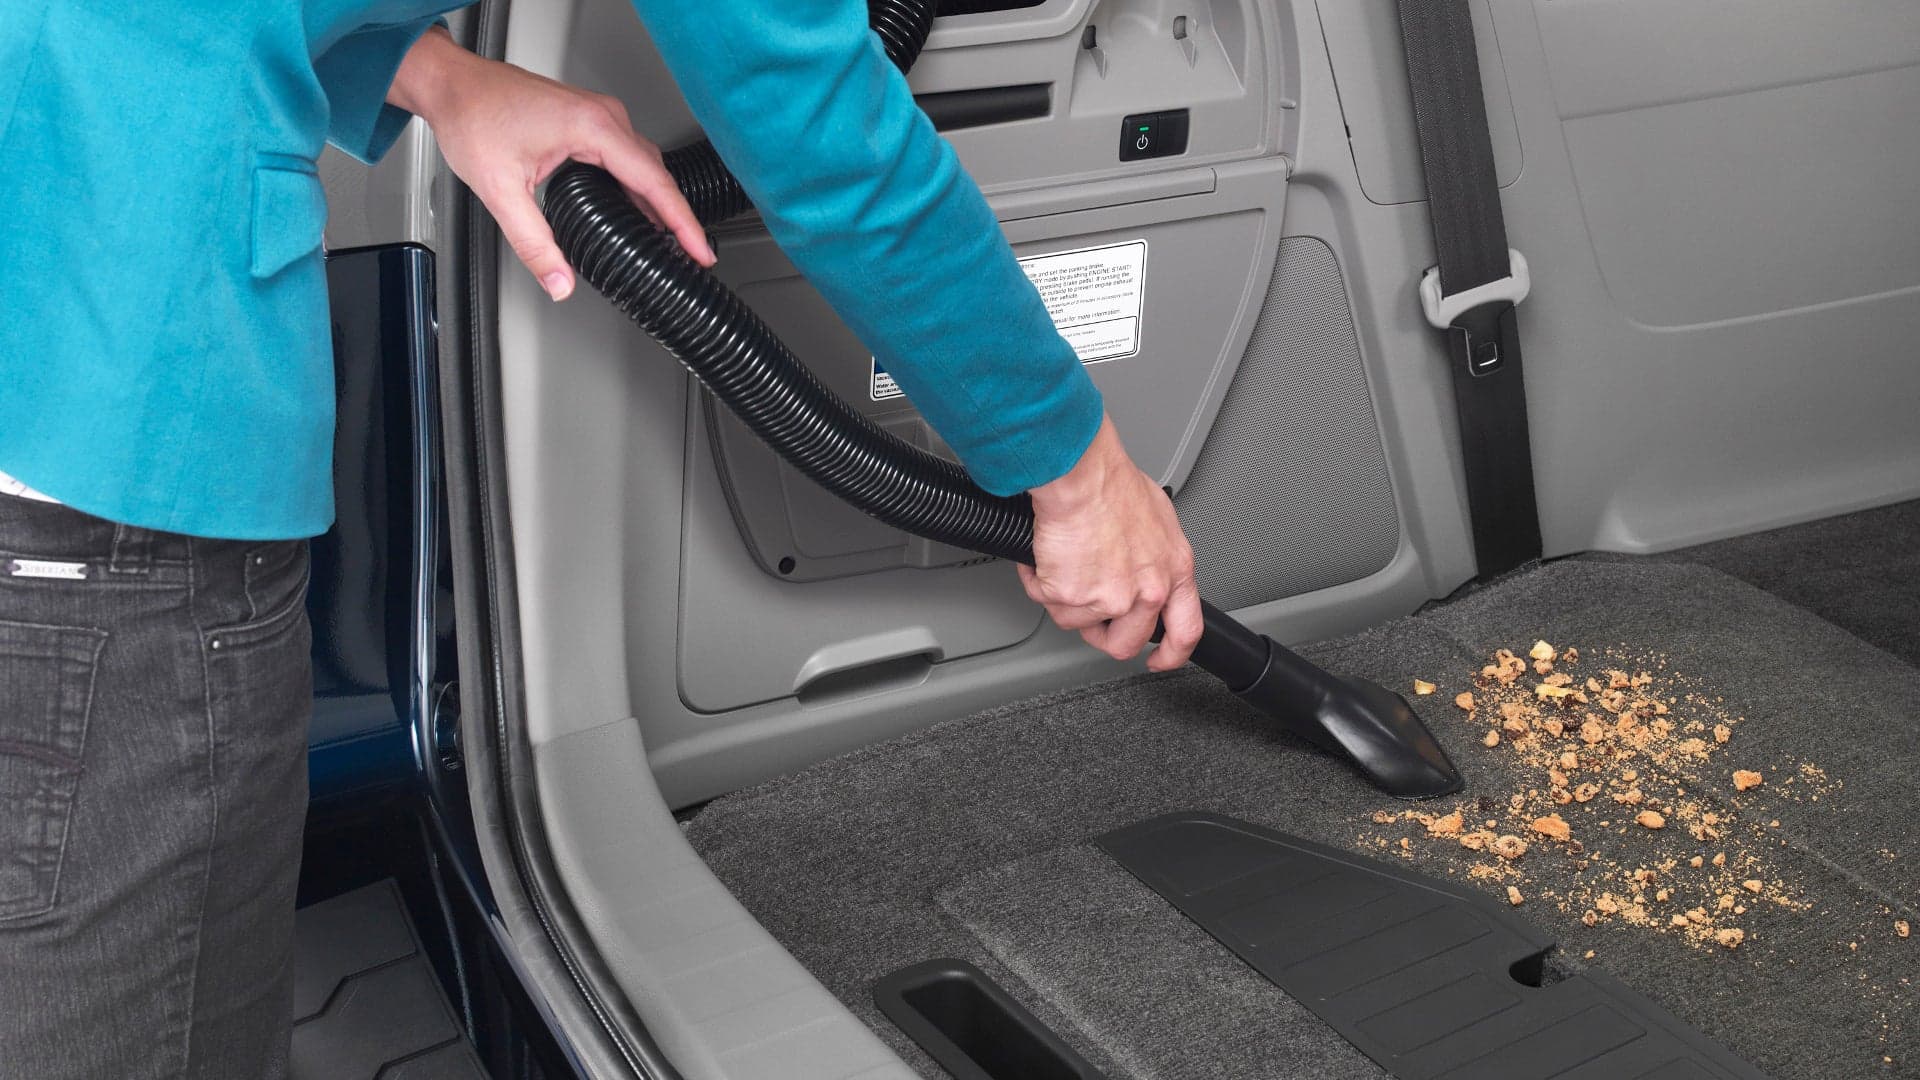 The Odyssey Minivan’s Brilliant HondaVac Was Discontinued Because Shop-Vac Went Out of Business